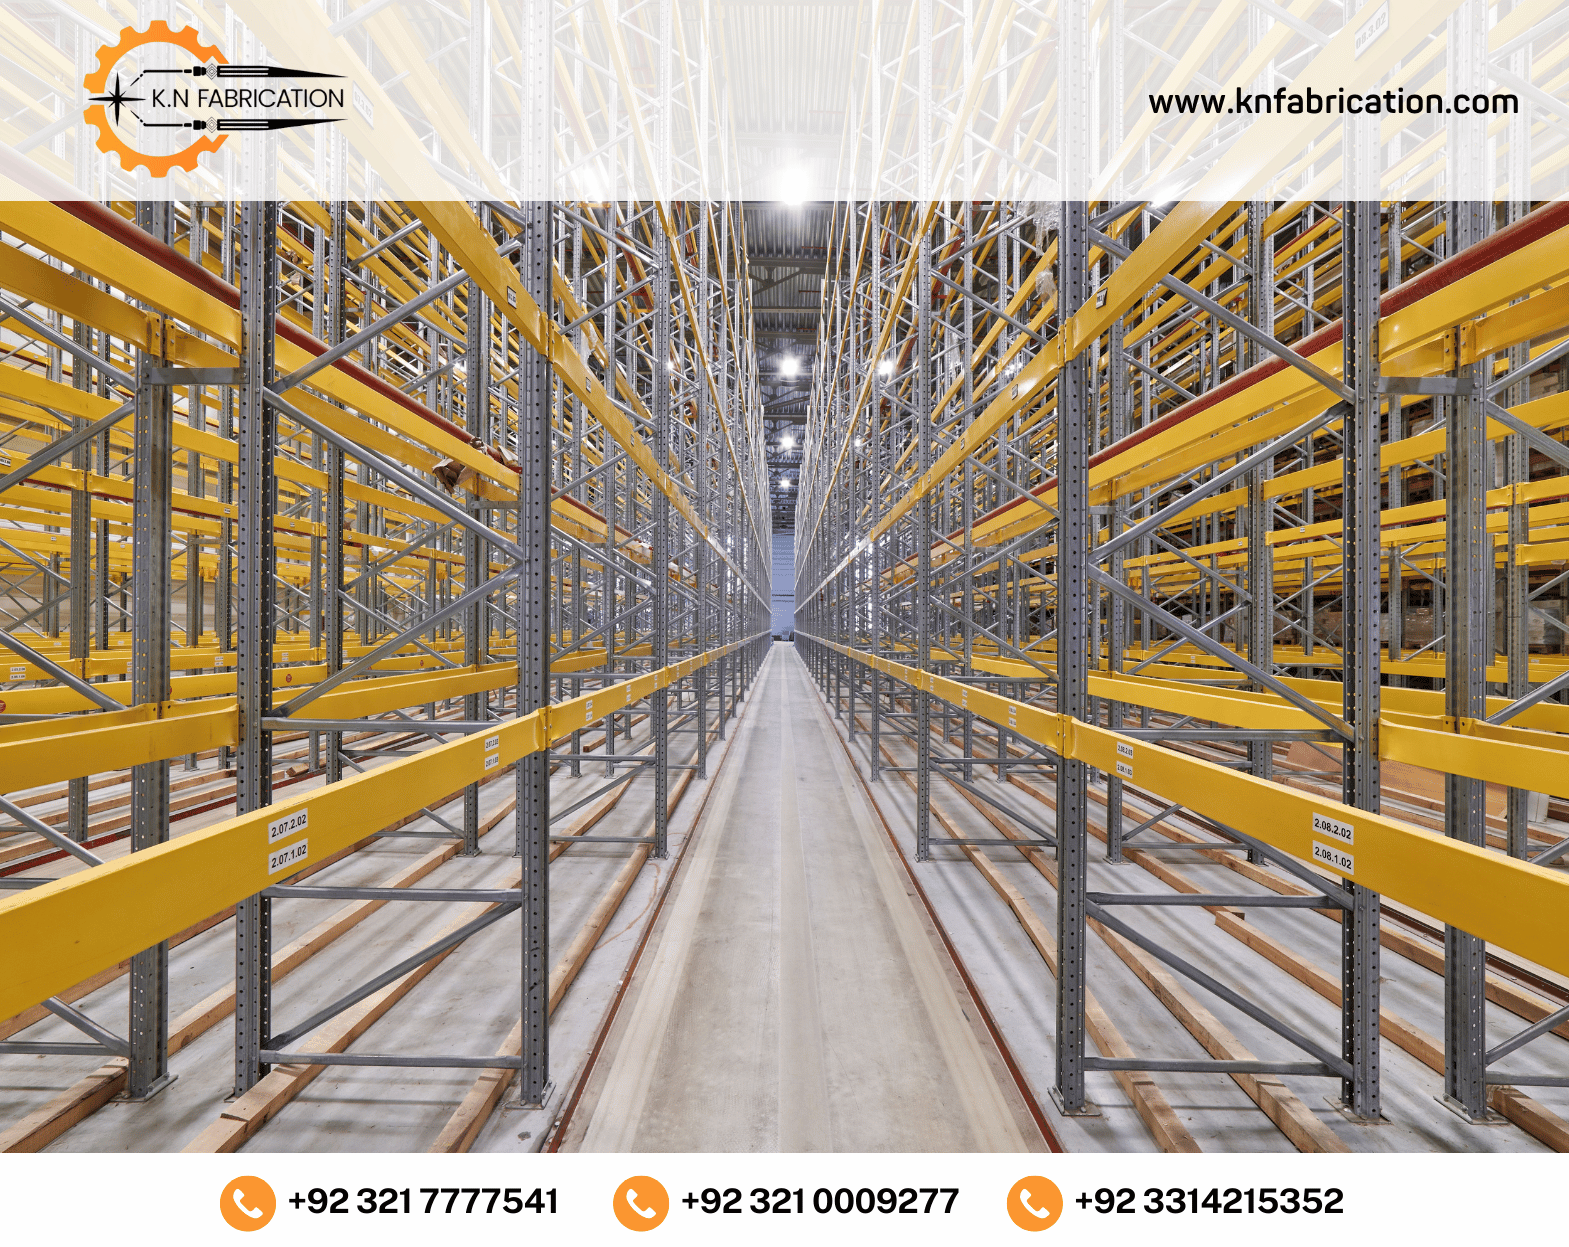 High-quality warehouse racking solutions in Pakistan by K.N Fabrication